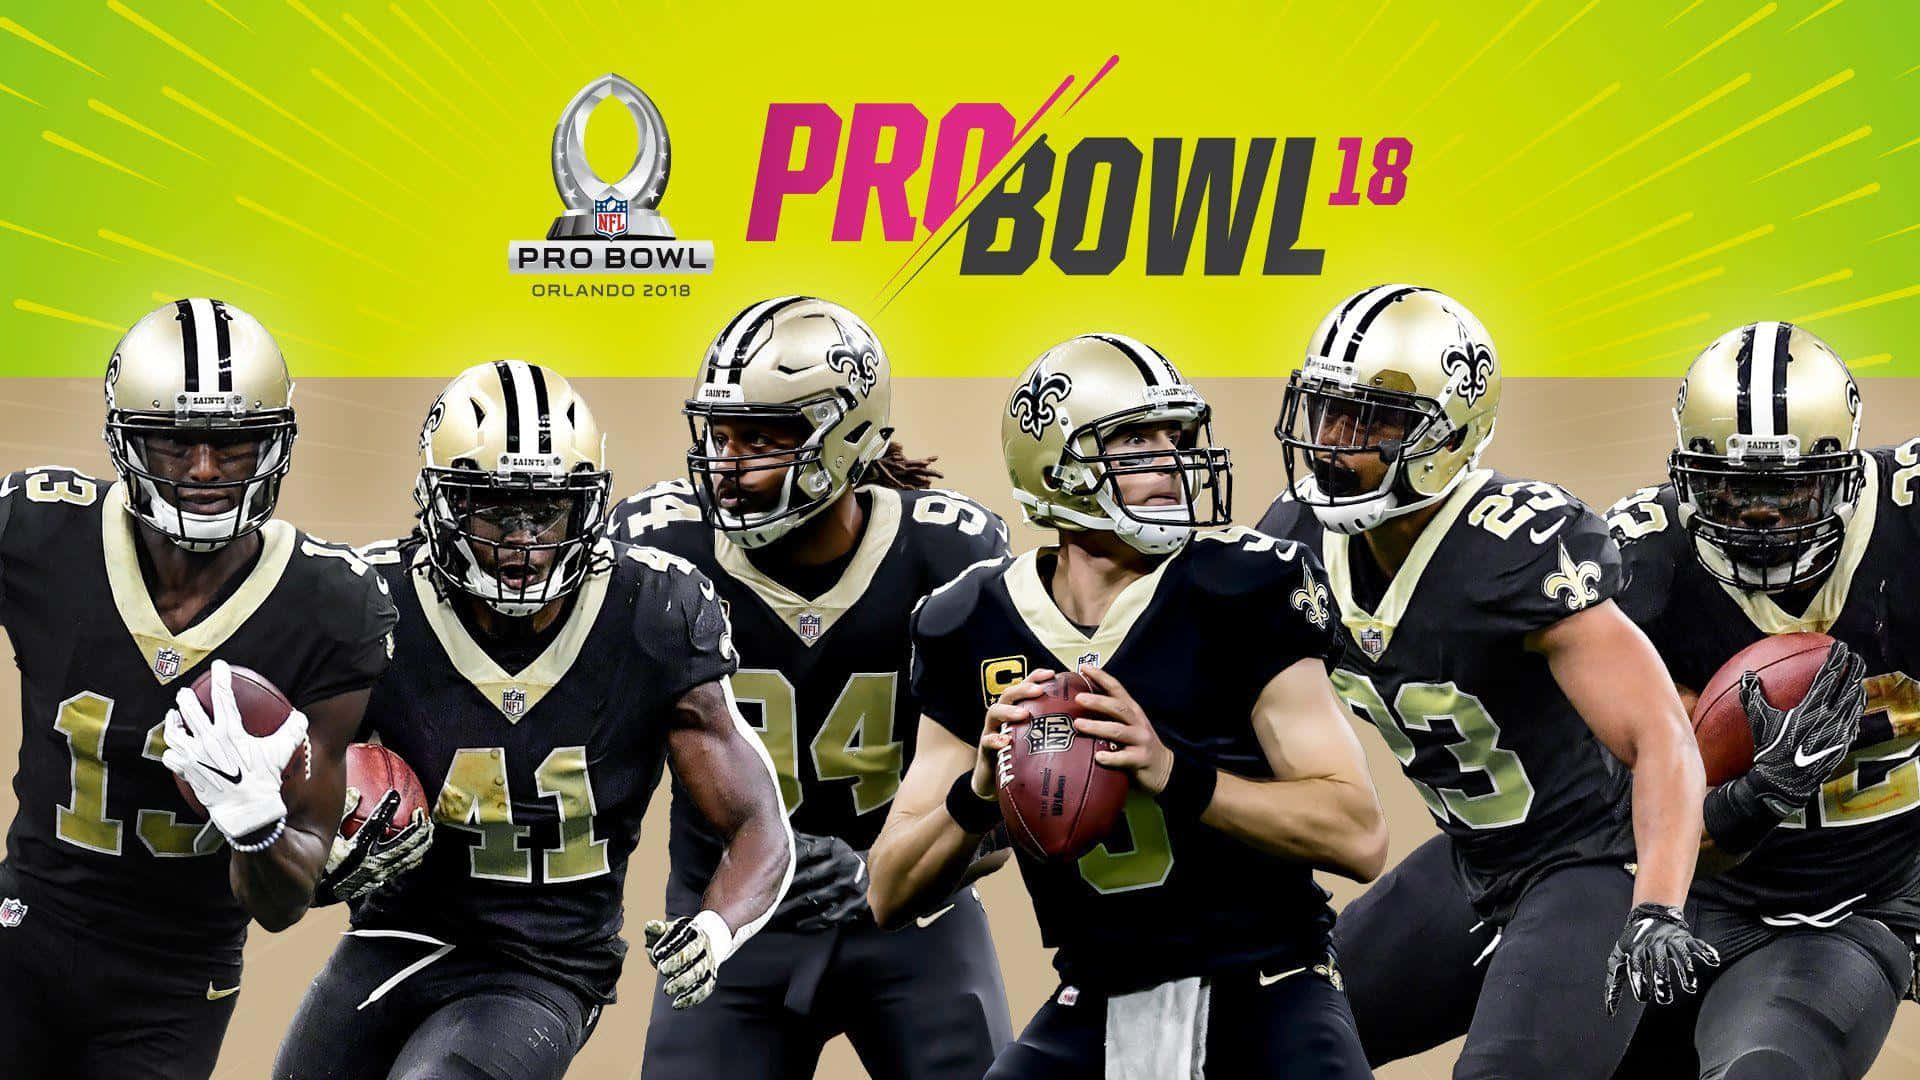 Pro Bowl Game Action - A Pivotal Moment Of Energetic Football Match At The Pro Bowl Wallpaper